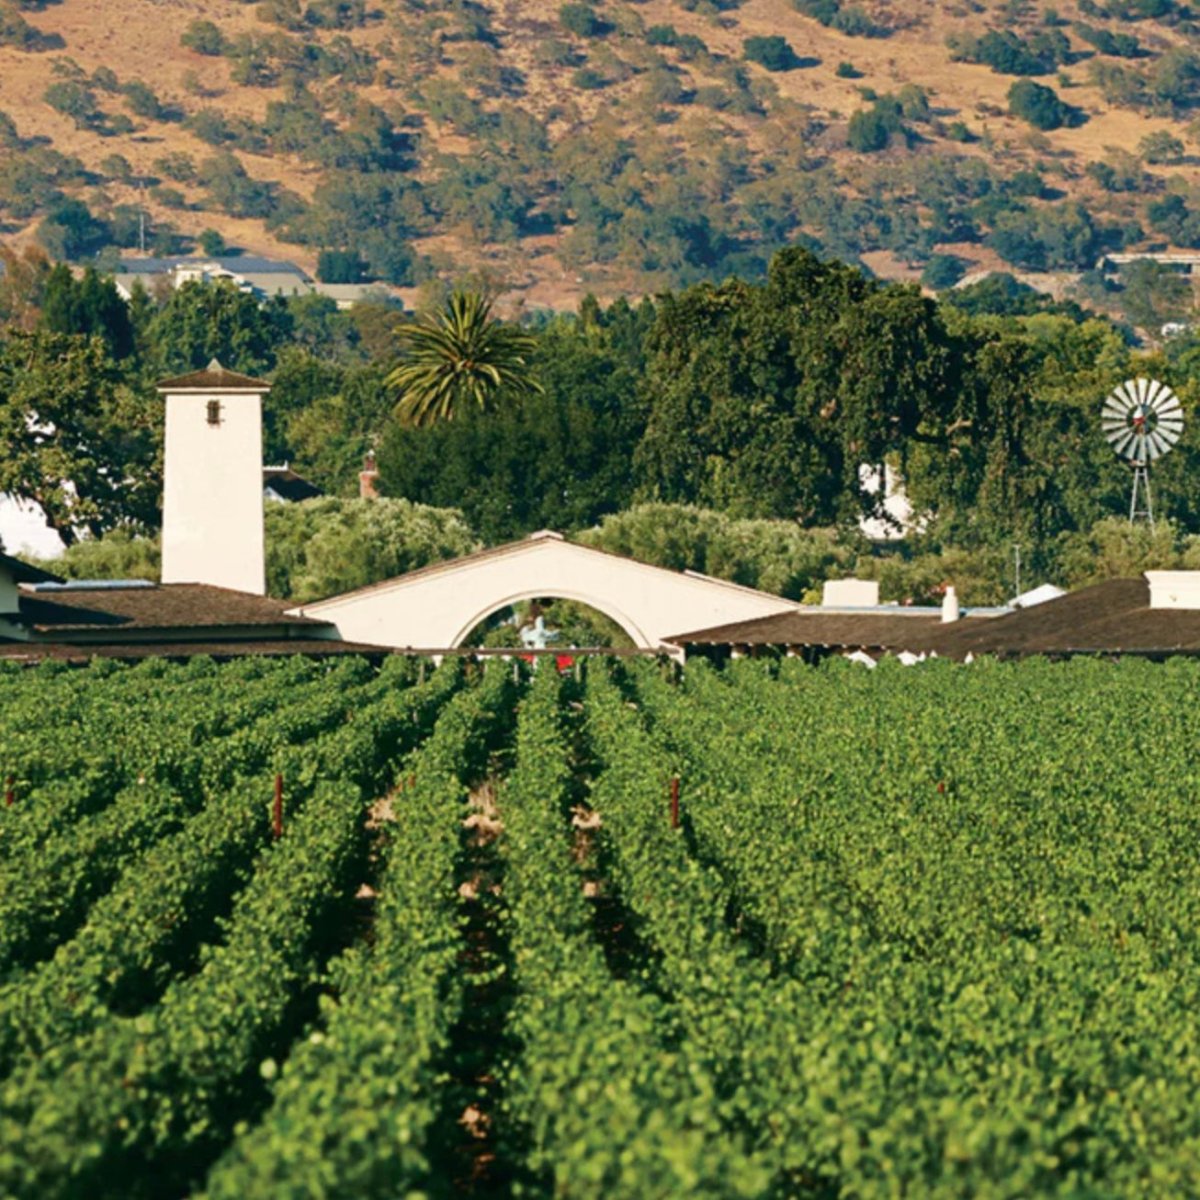 Discover the Most Famous Vineyard in California: Robert Mondavi Winery and Other Iconic Vineyards - Corkframes.com